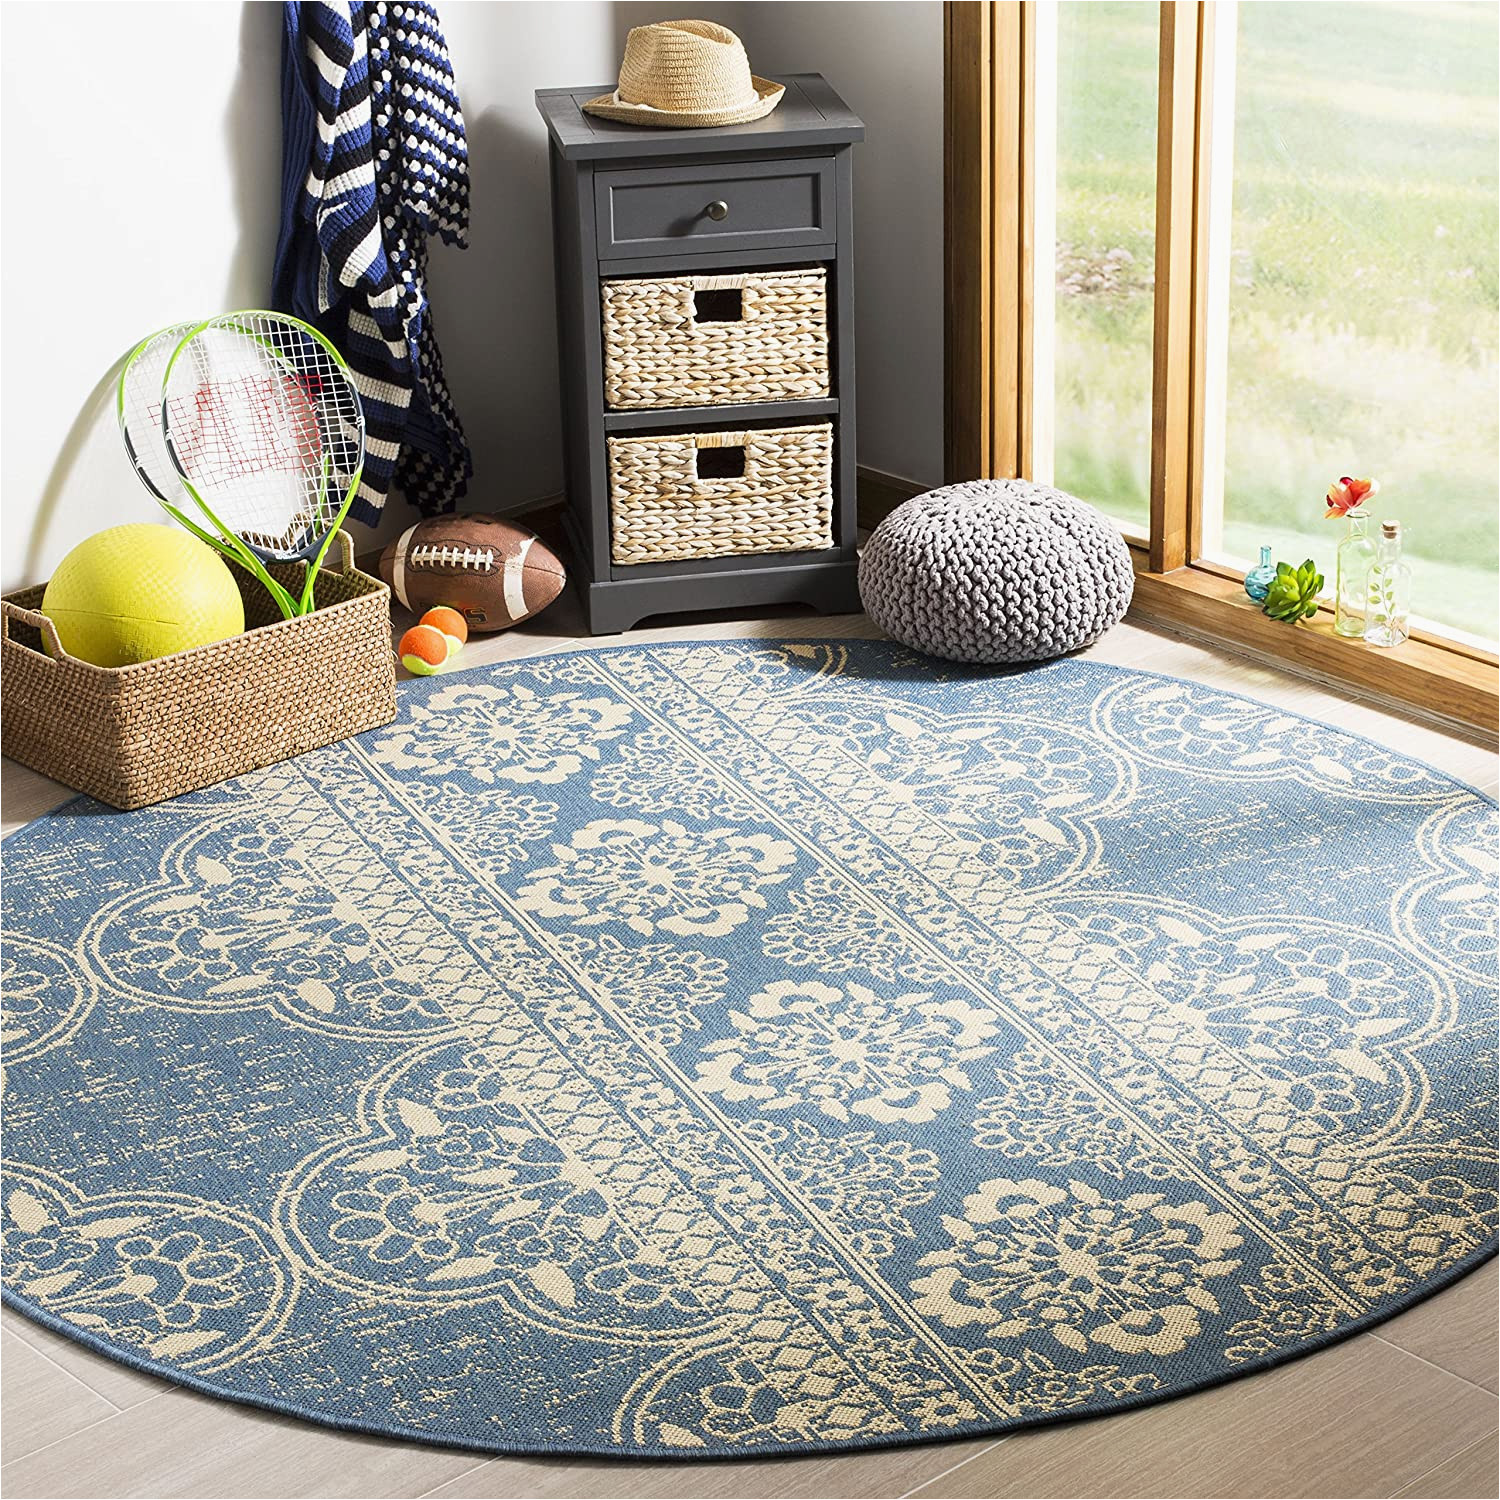 Blue and White Rugs Amazon Safavieh Linden Collection Lnd174n area Rug, 6’7″ X 6’7″ Round, Cream/blue